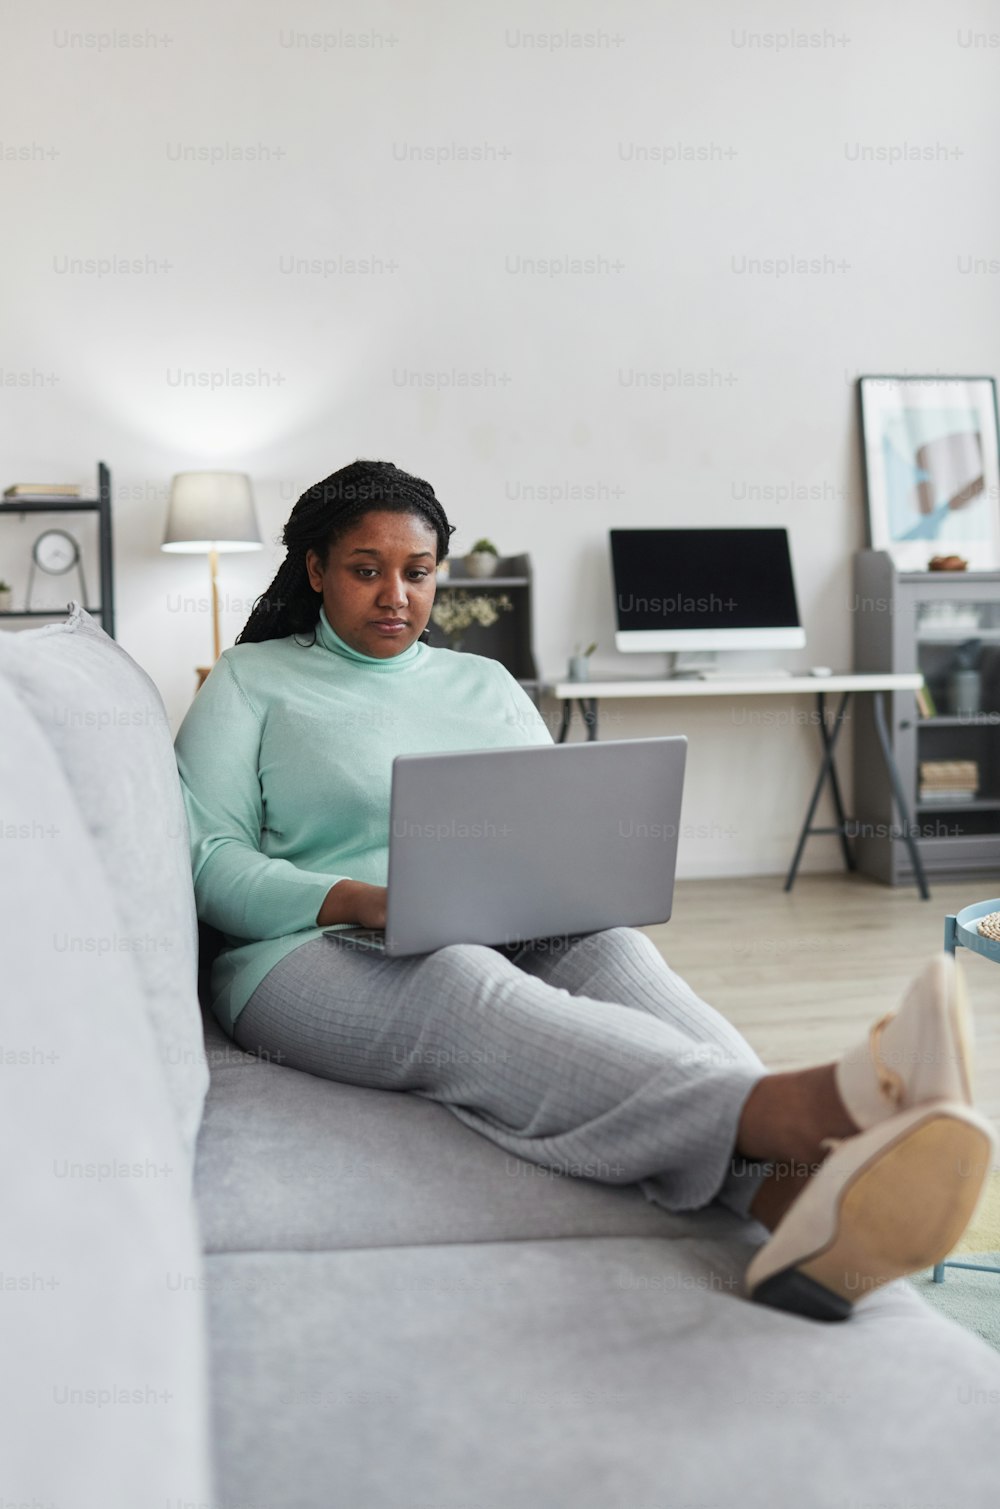 Vertical full length portrait of curvy African American woman using laptop while enjoying work from home relaxing on couch in modern minimal interior